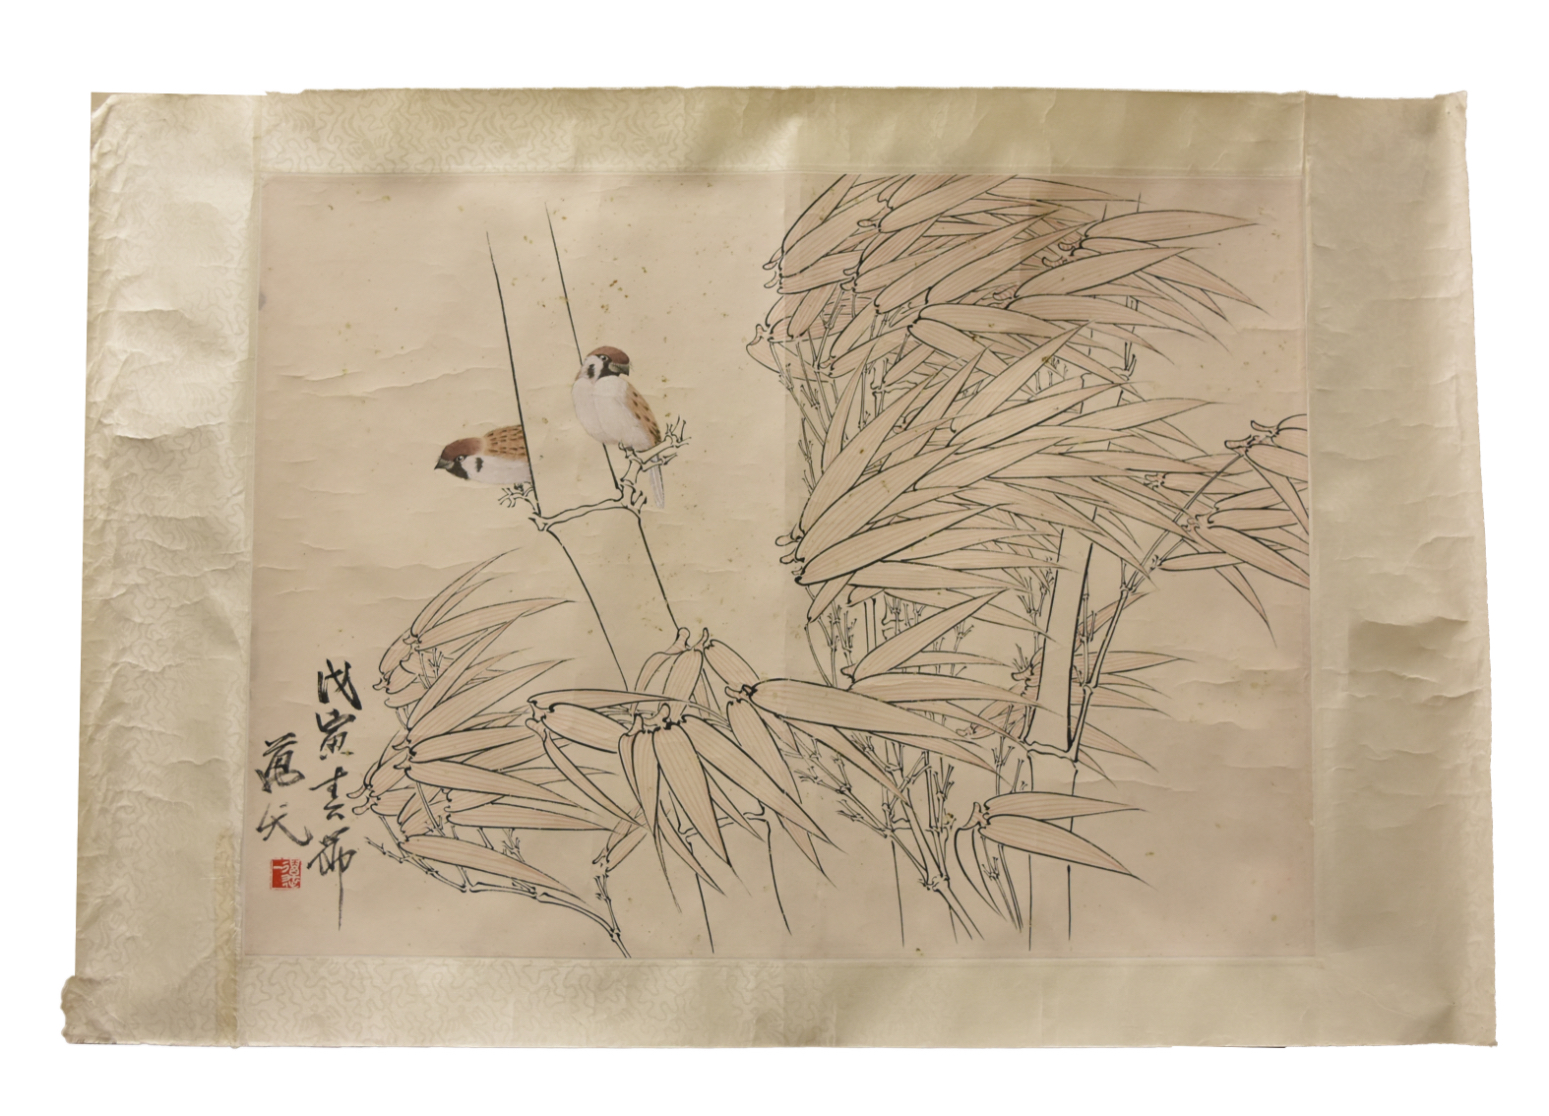 CHINESE PAINTING OF SONGBIRDS  2cf7b4